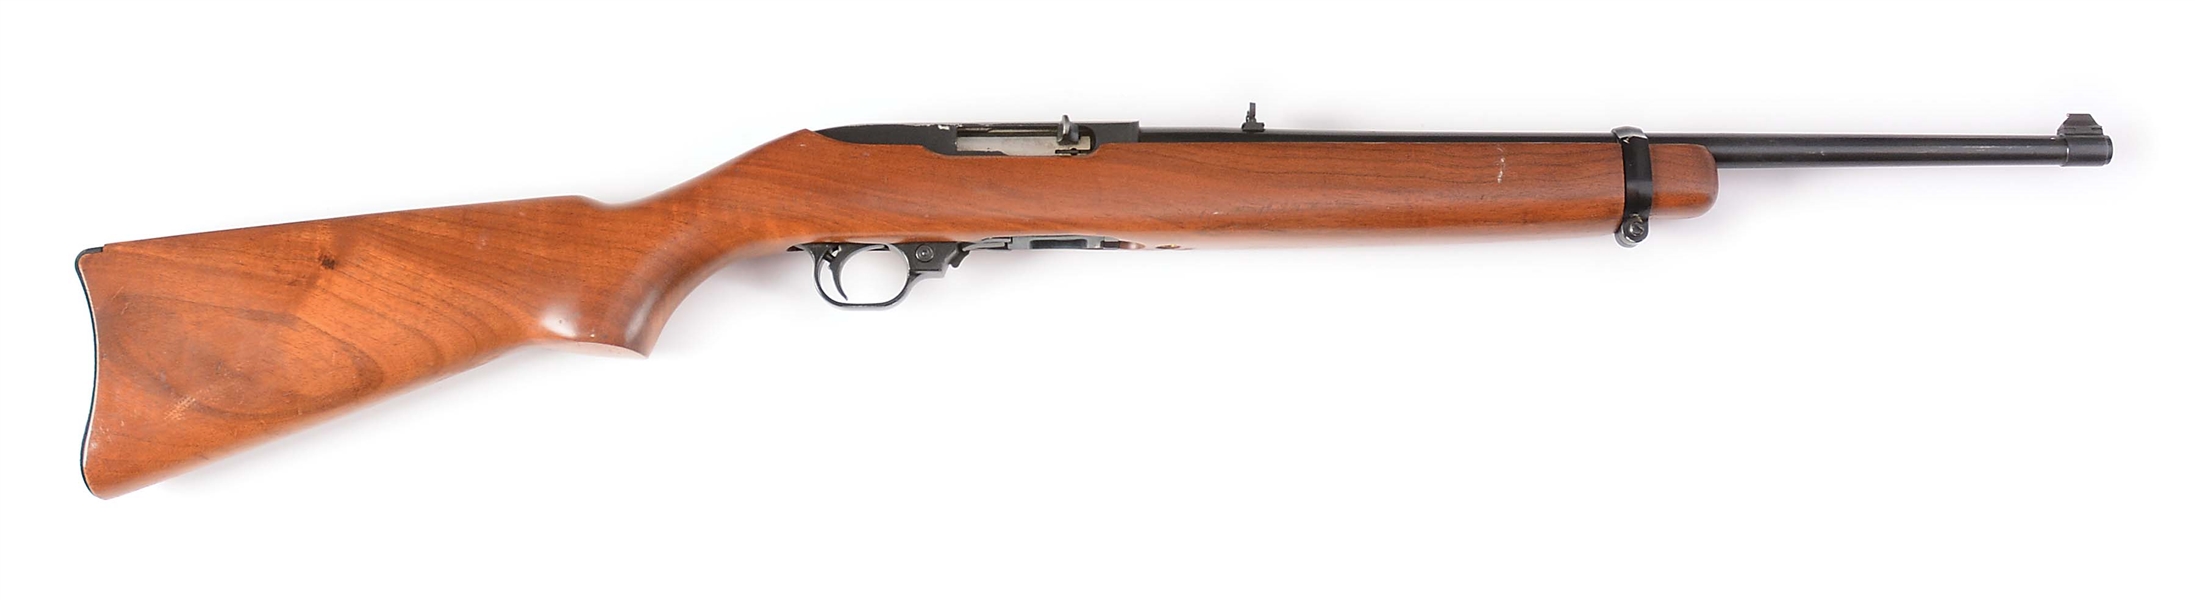 (M) RUGER 10/22 SEMI-AUTOMATIC RIFLE.